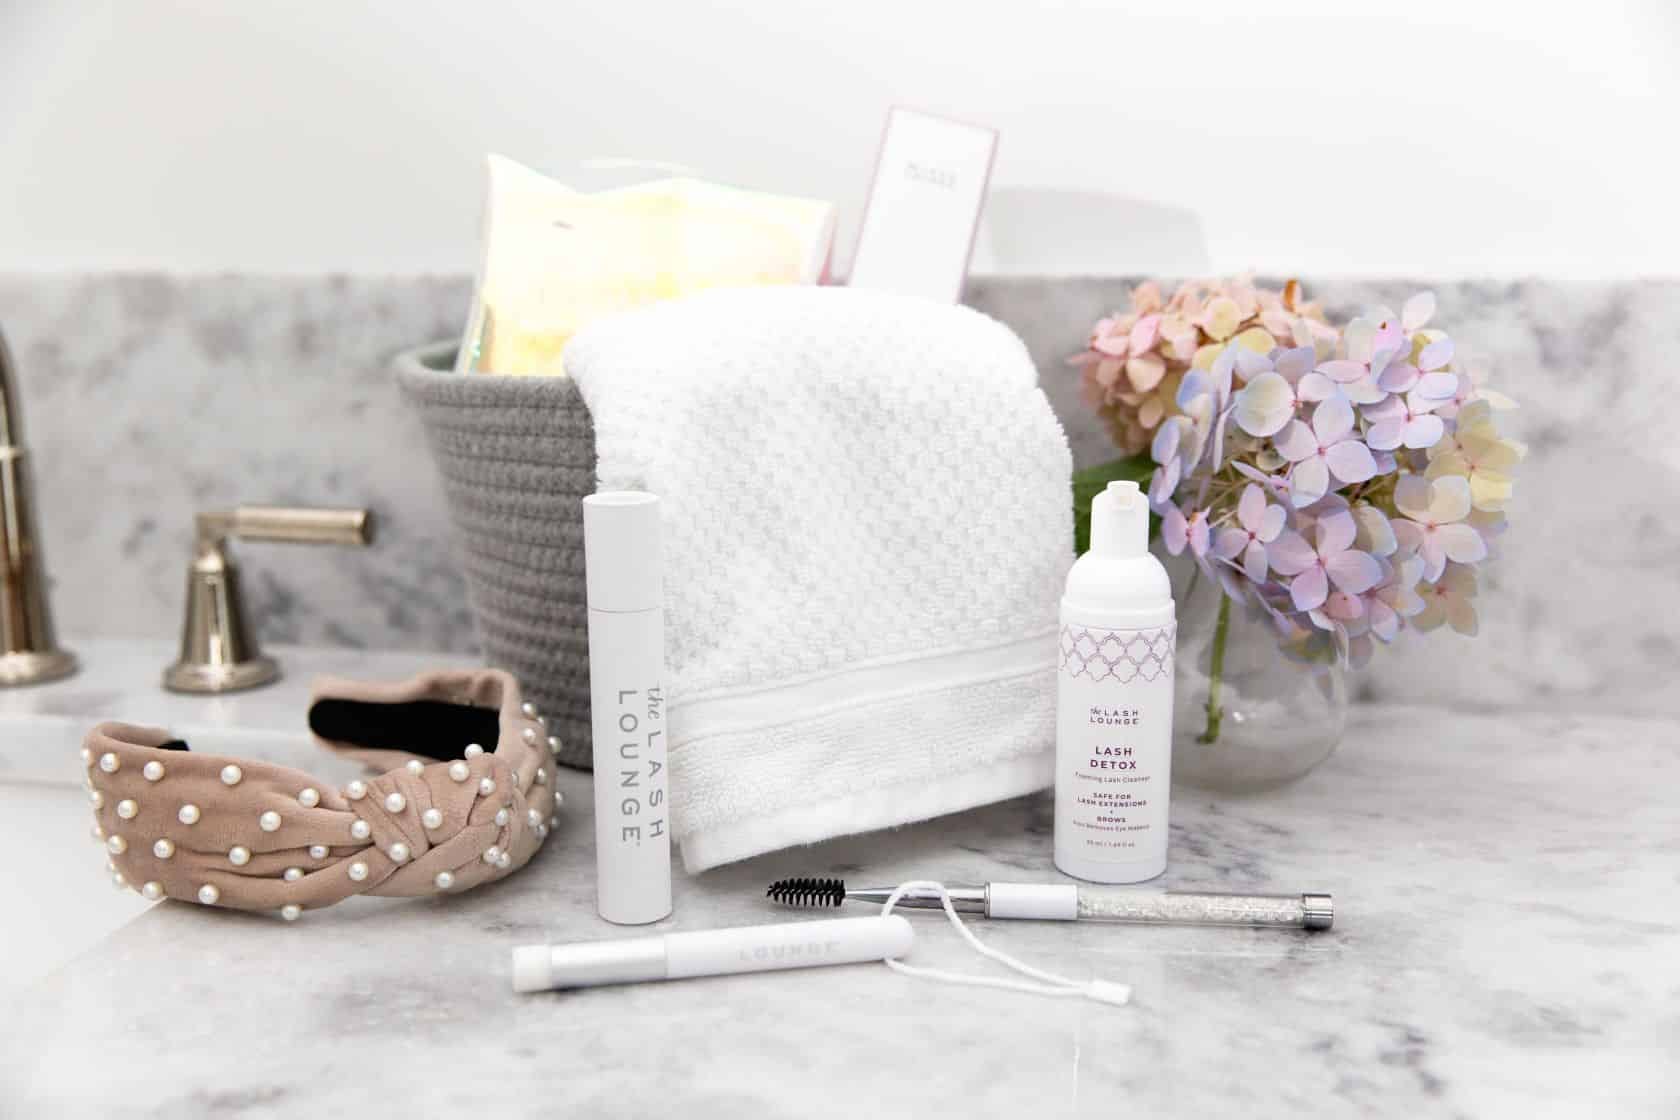 The Lash Lounge’s aftercare kit products sitting on a bathroom counter with other accessories.